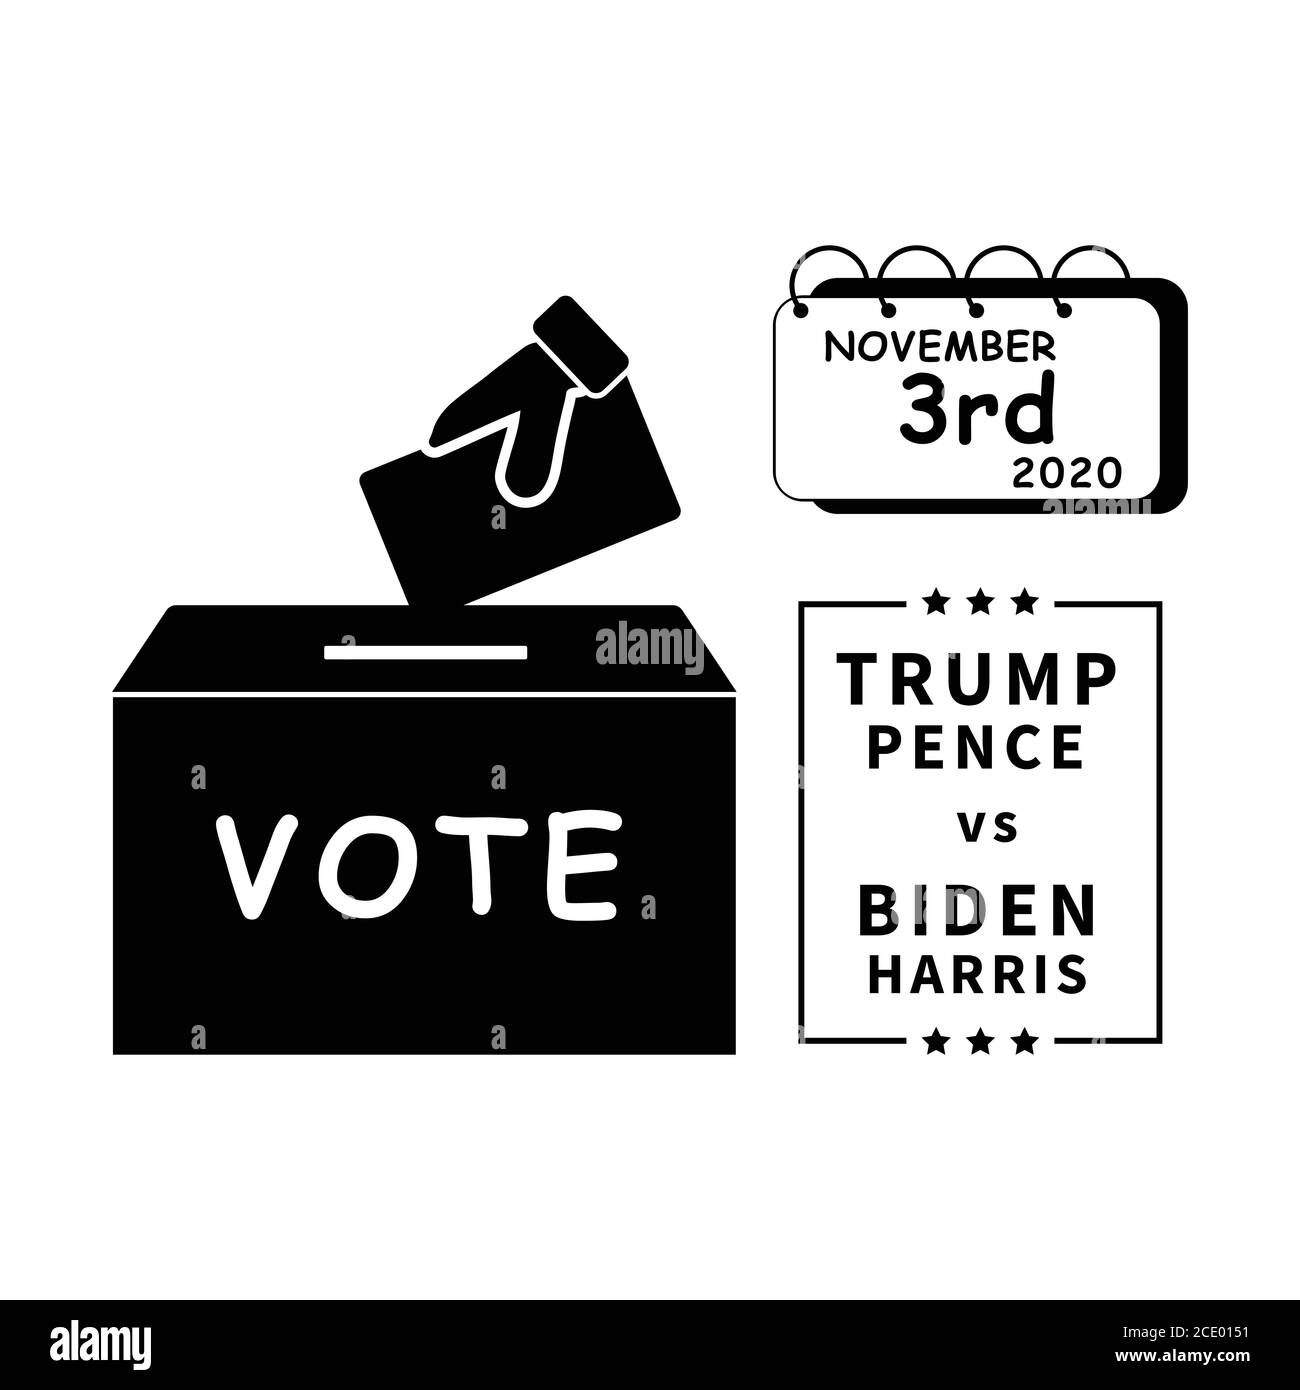 2020 US Presidential Election on November 3rd. Cast Voting Ballots Votes for Donald Trump and Mike Pence vs Joe Biden and Kamala Harris. Black and Whi Stock Vector